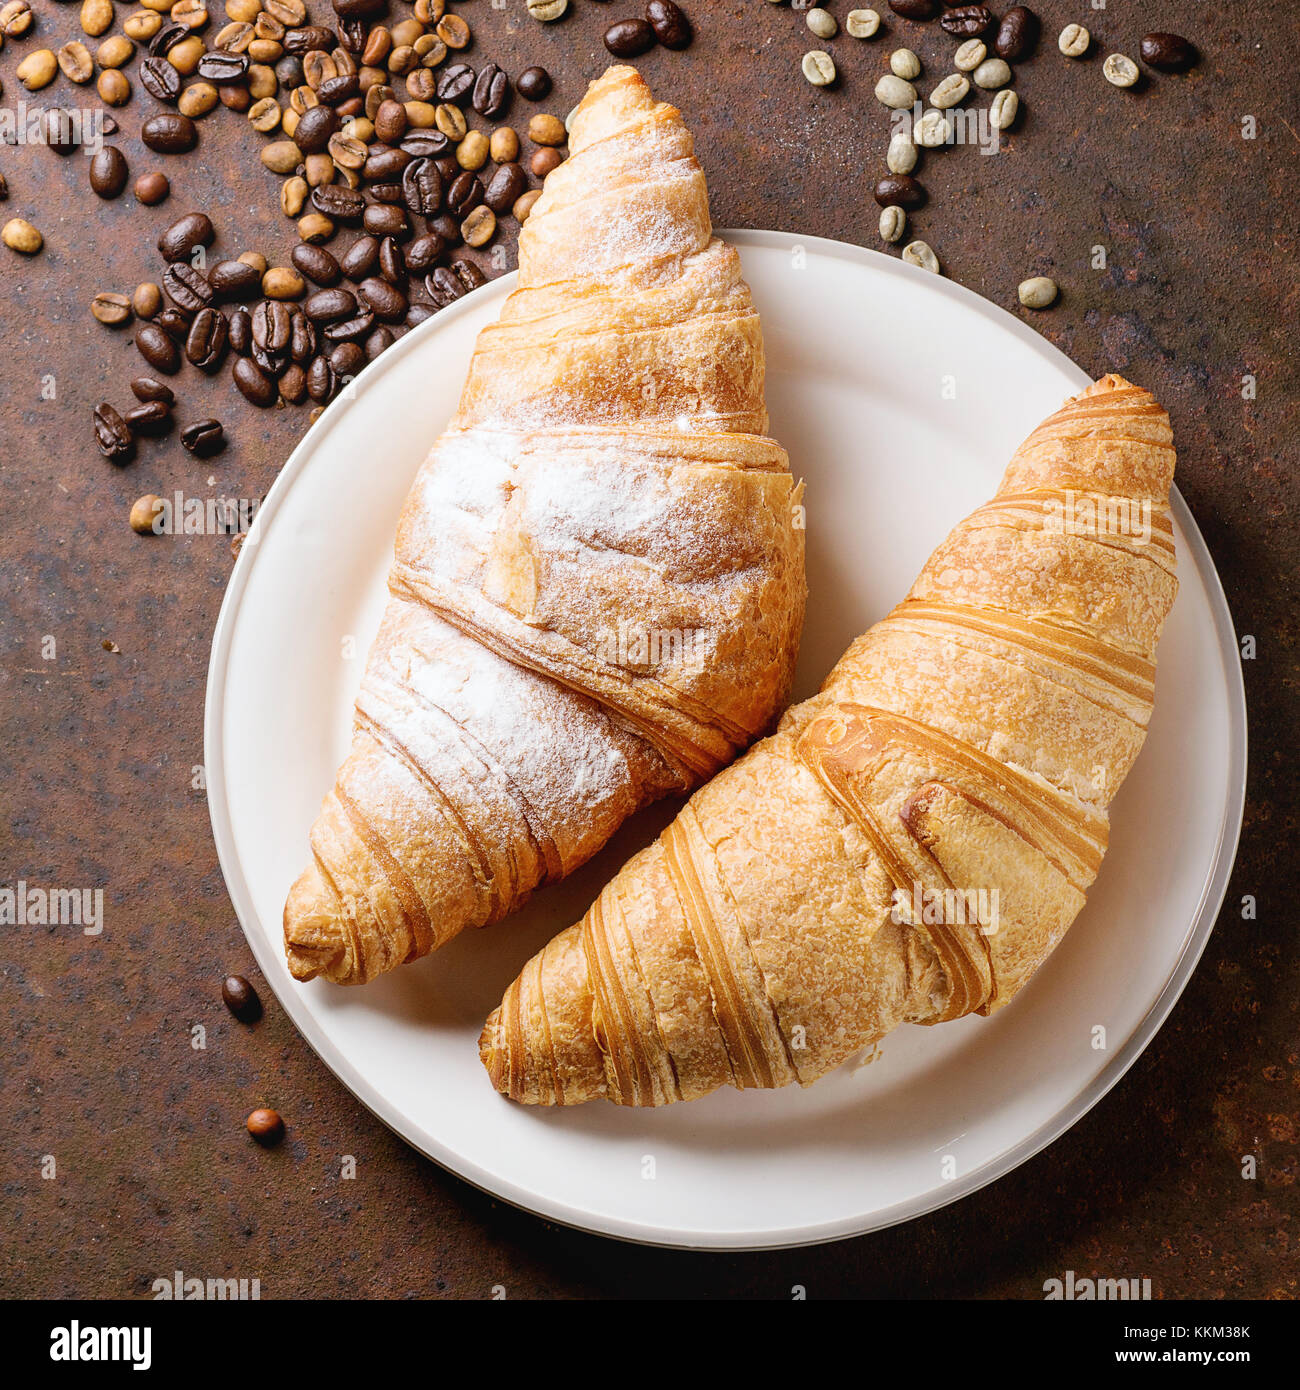 Plate with two fresh baked croissants with heap od roasted and  unroasted coffee beans over rusty metal background. Square image Stock Photo